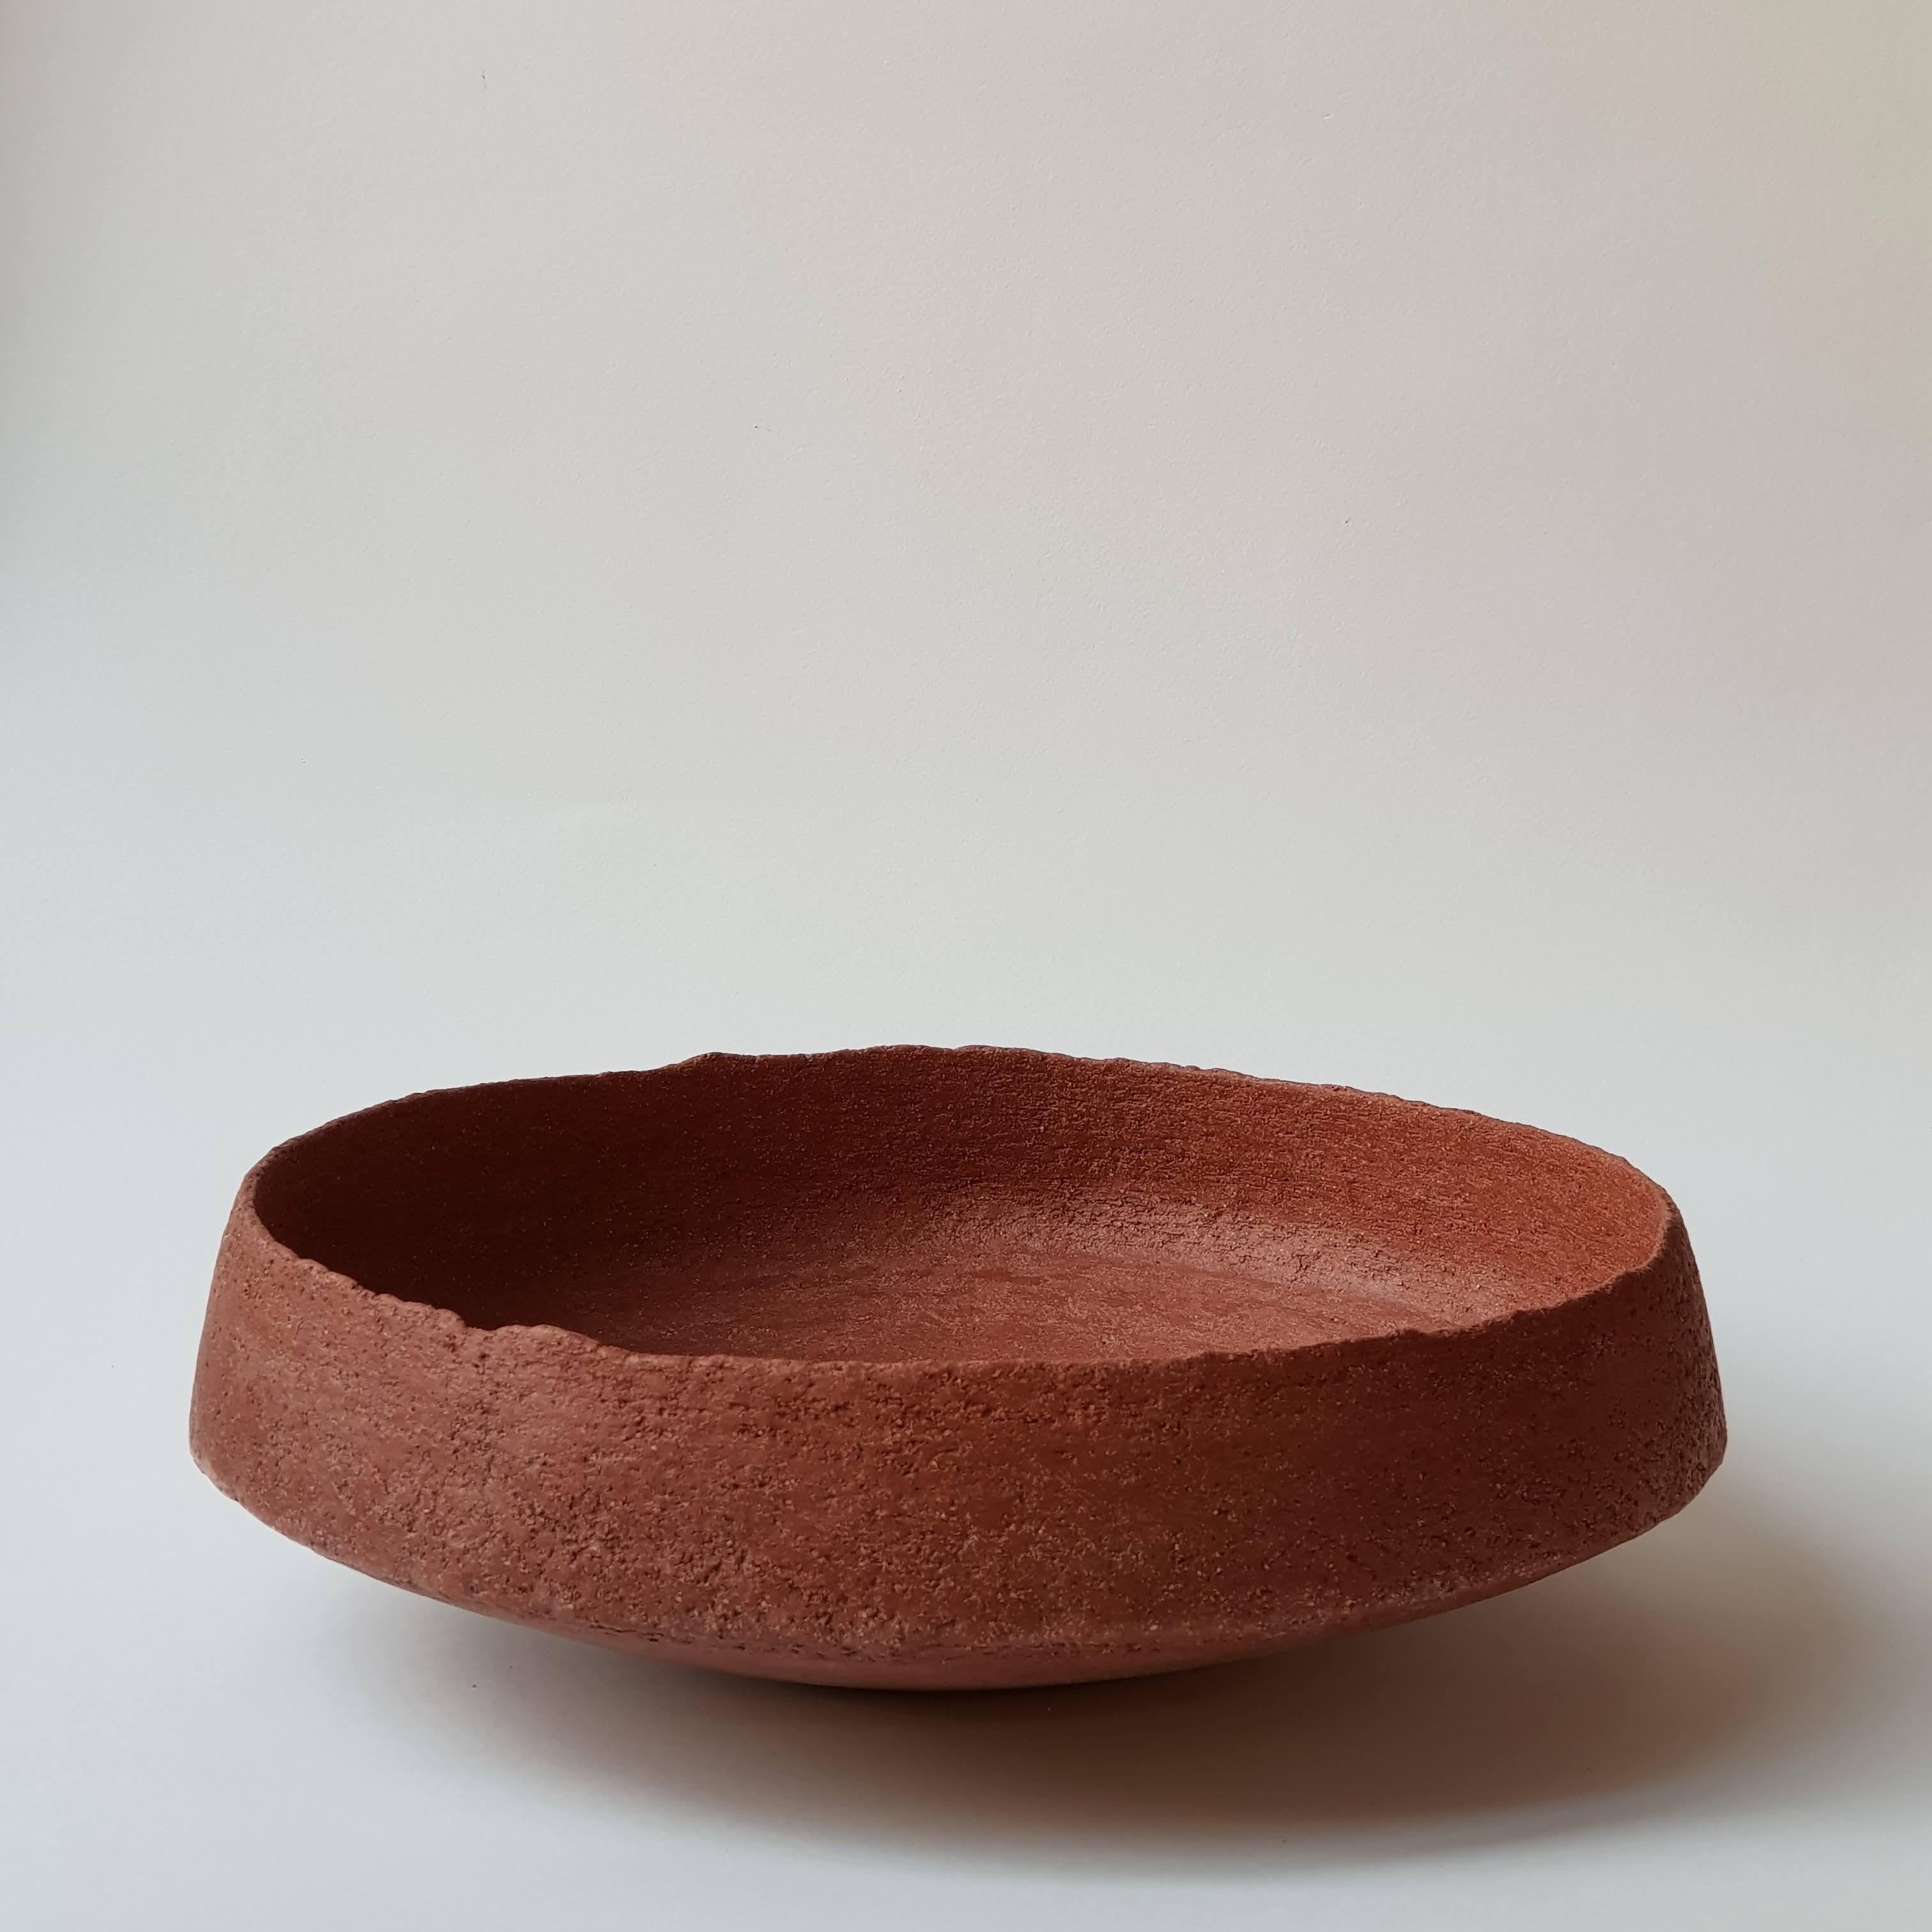 Red Stoneware Pinakio Plate by Elena Vasilantonaki
Unique
Dimensions: ⌀ 34 x H 10 cm (Dimensions may vary)
Materials: Stoneware
Available finishes: With\without handles - Black, White, Grey , Brown, Red, White Patina

Growing up in Greece I was